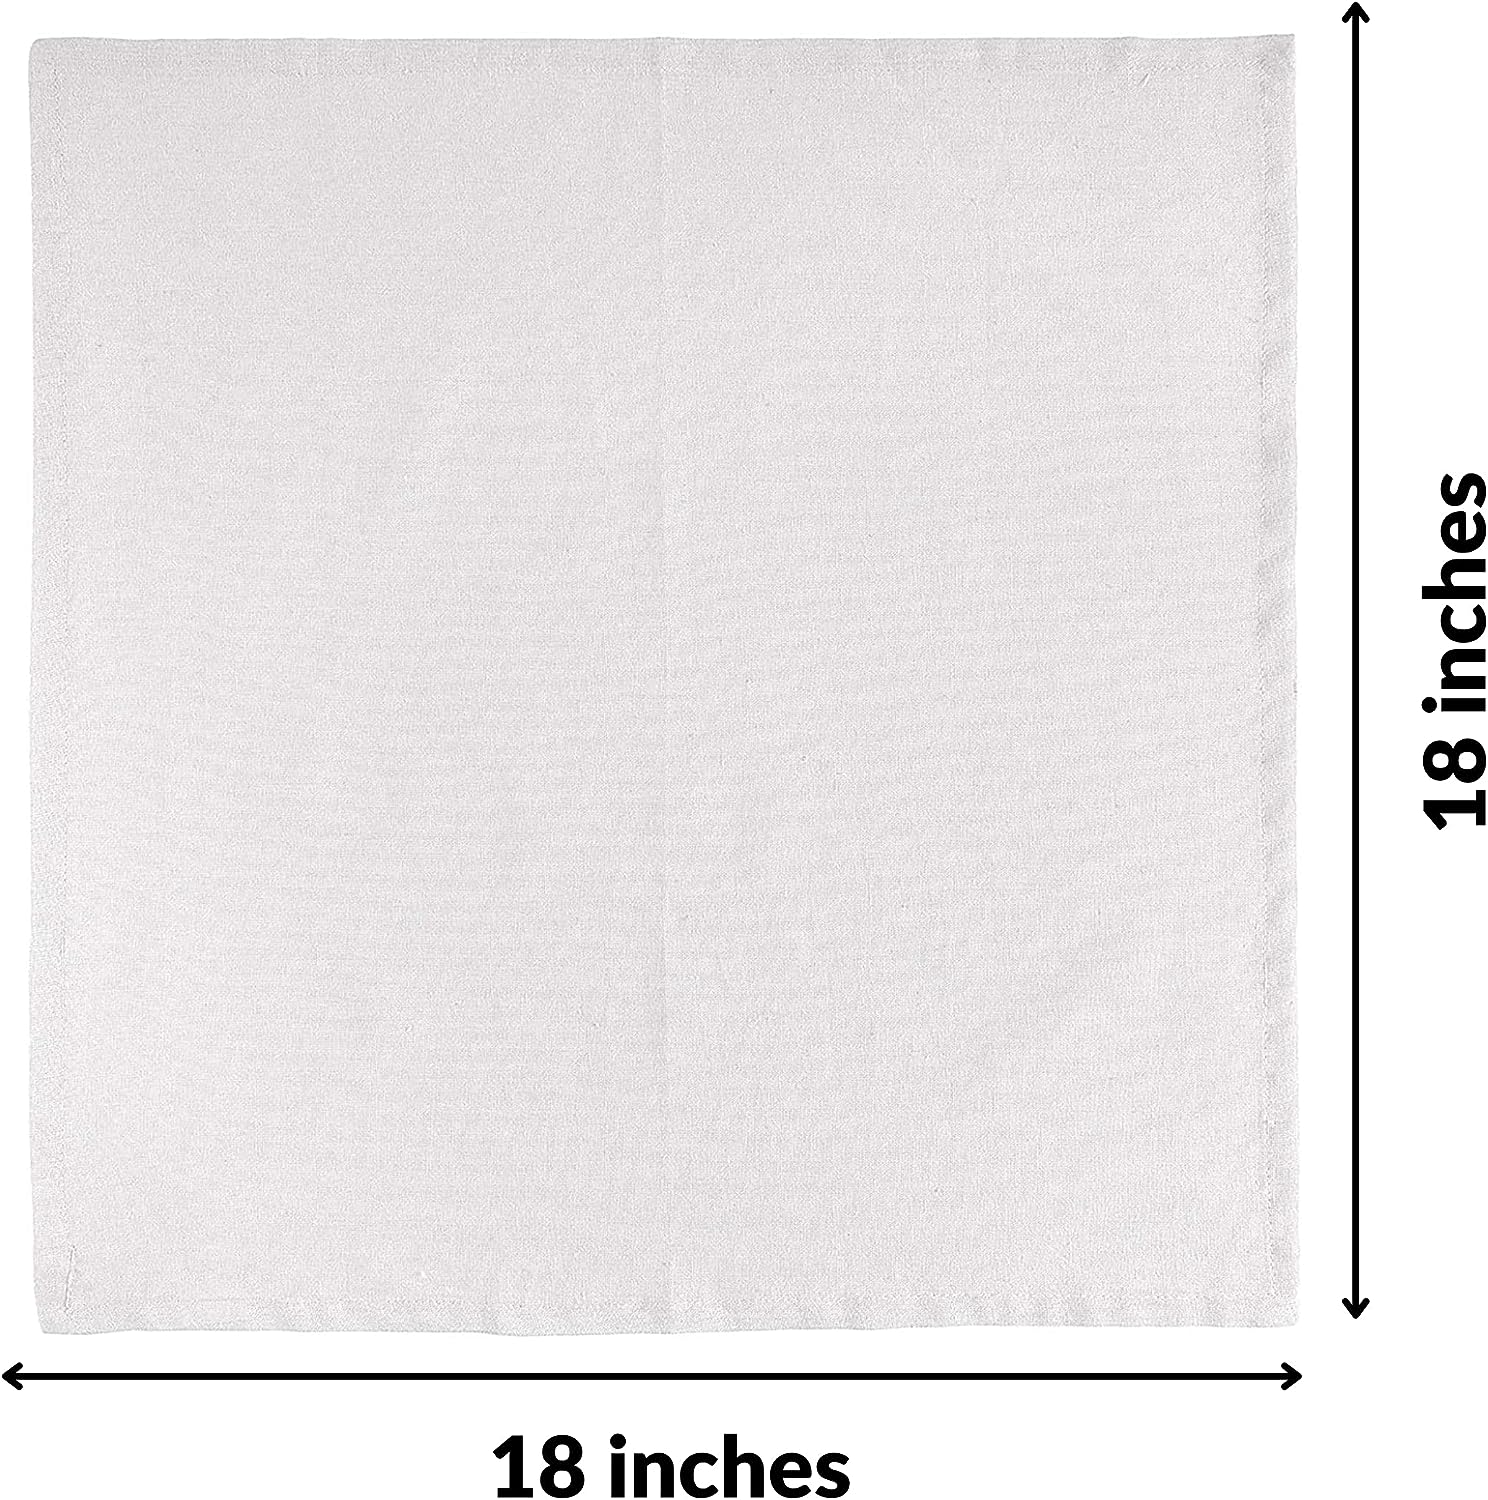 FINGERCRAFT Dinner Cloth Napkins, Cotton Linen Blend Fabric 12 Pack White Easter Special, Premium Quality, Mitered Corners for Every Day Use Napkins are Pre Shrunk and Good Absorbency White 5